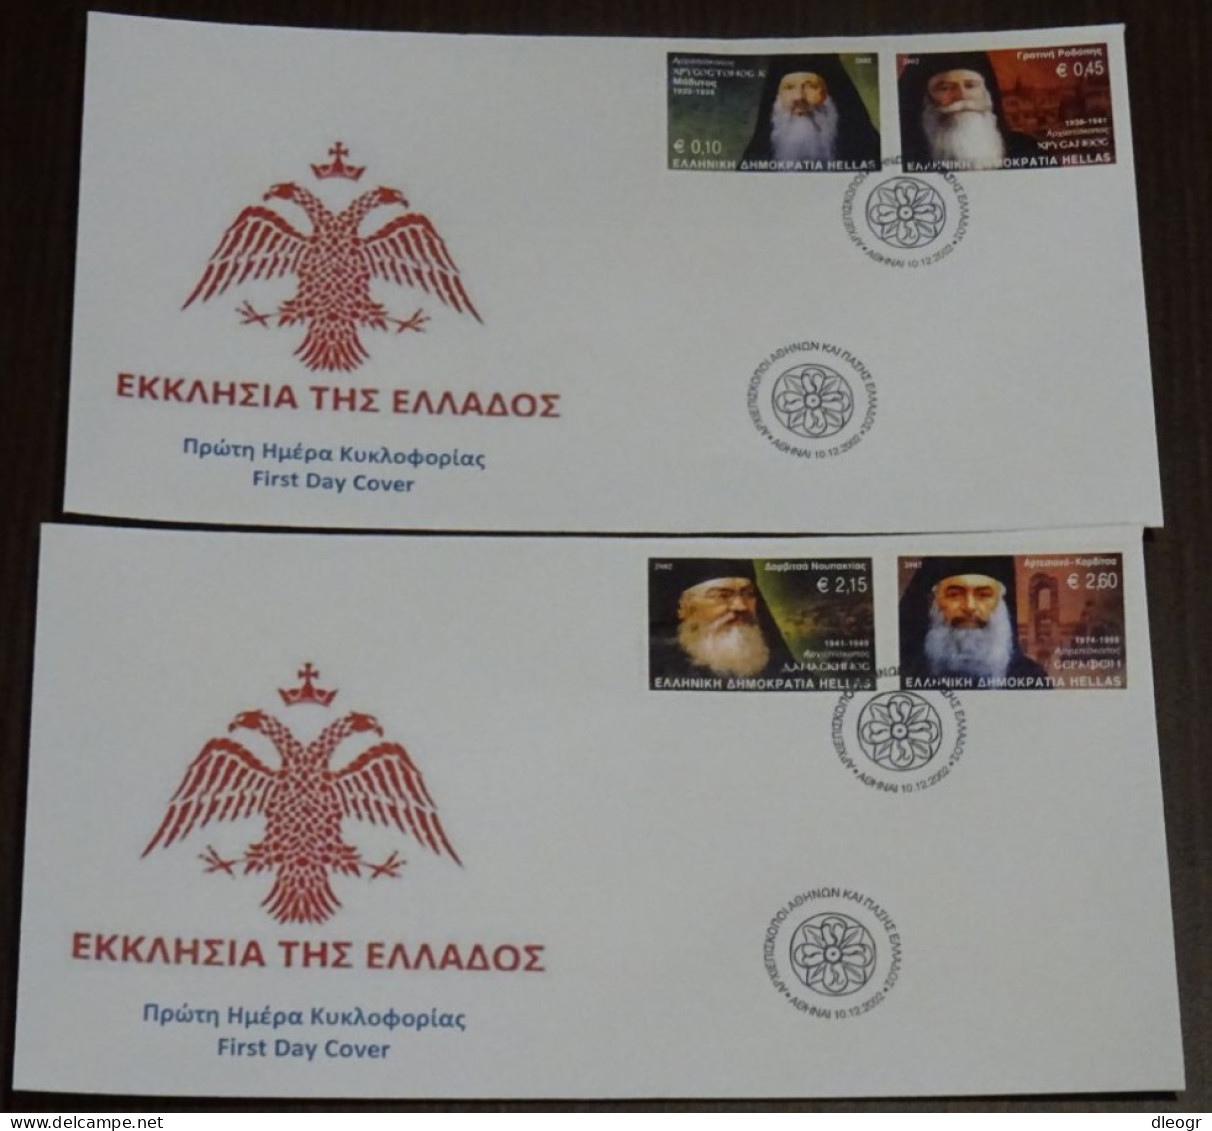 Greece 2002 Archbishops Unofficial FDC - FDC